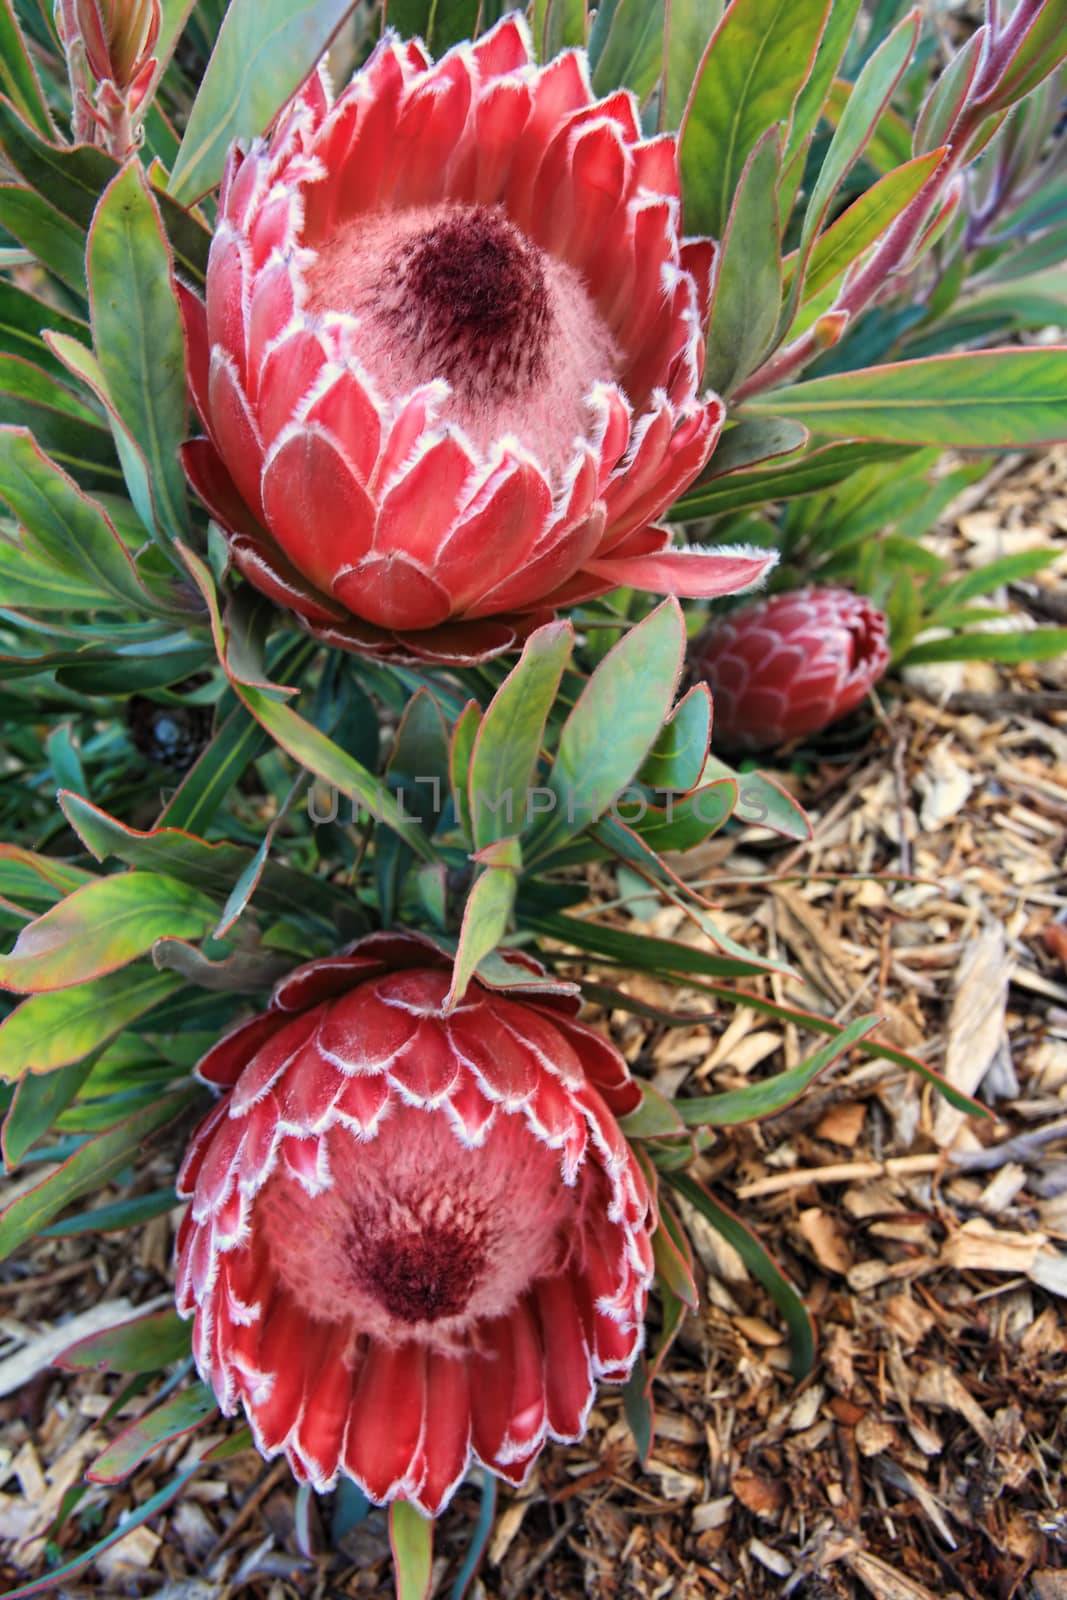 Two blooming protea flowers by lovleah